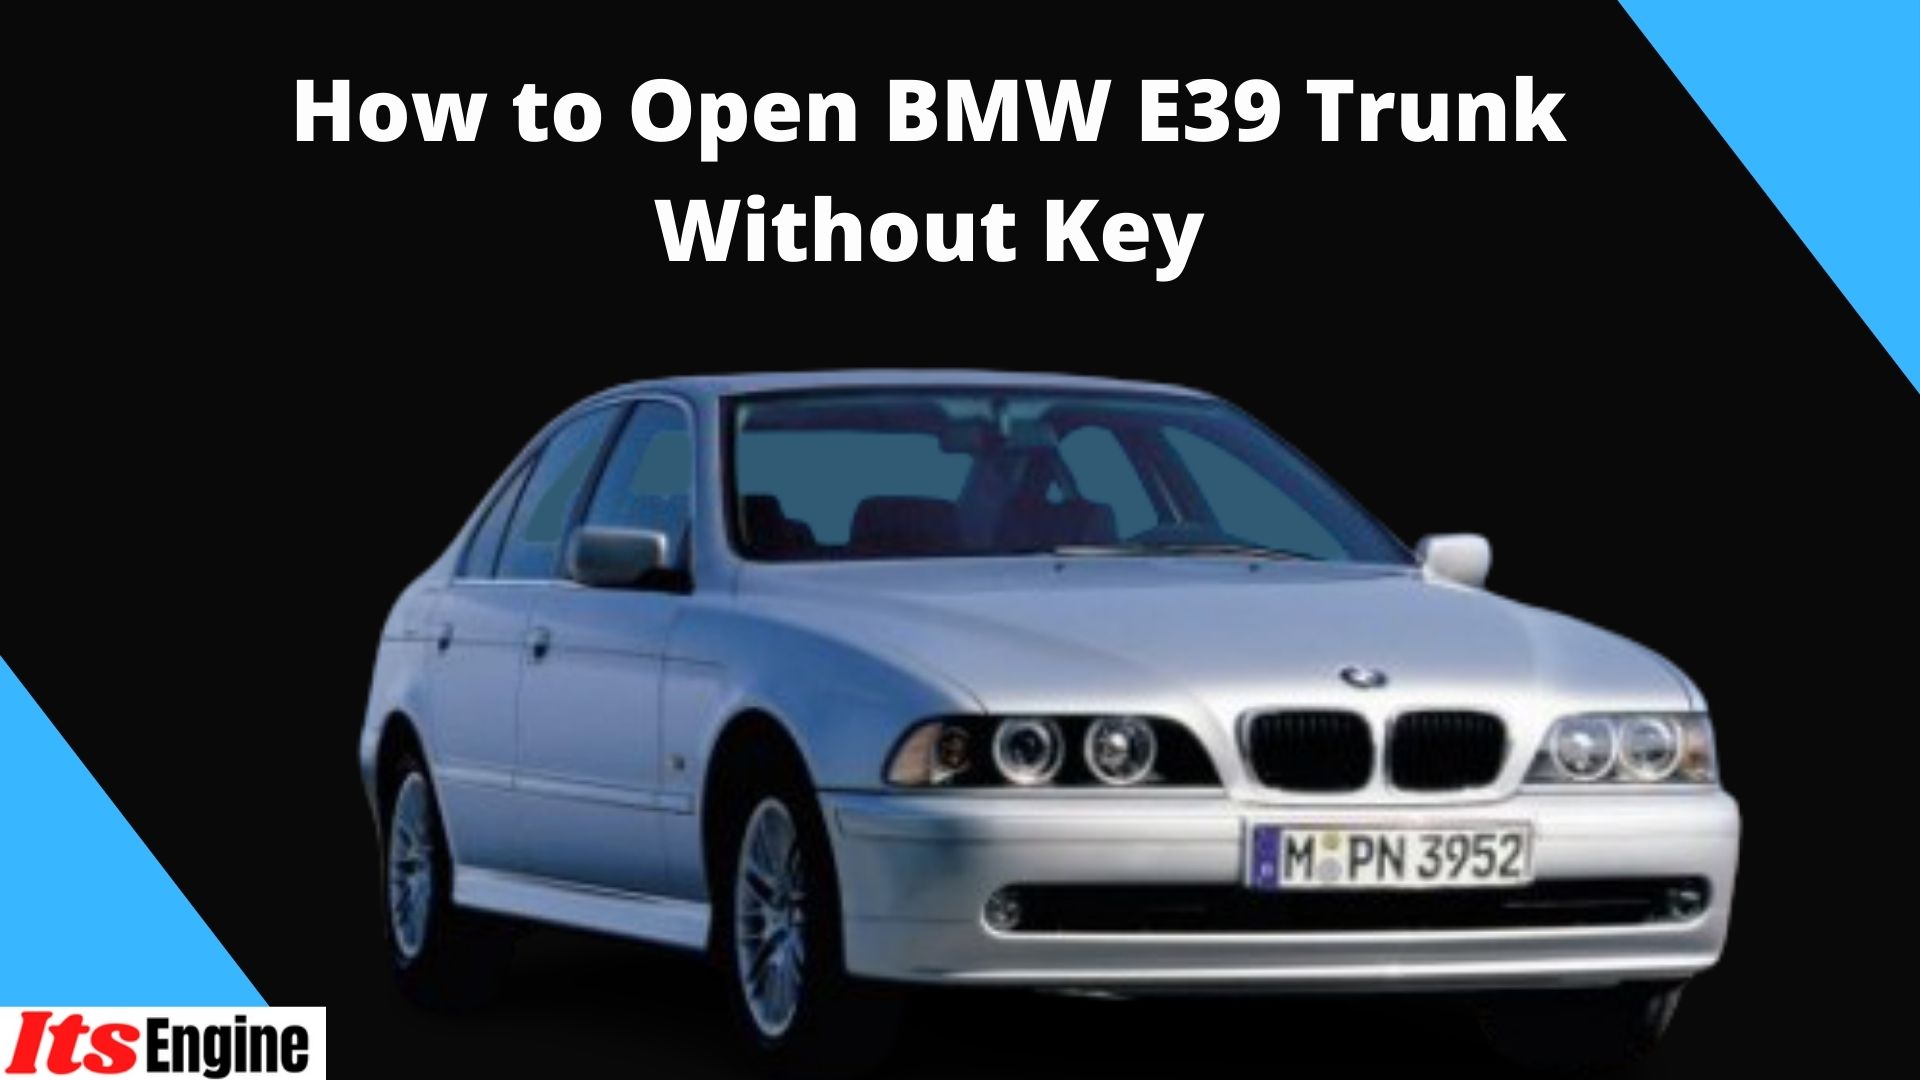 How to Open BMW E39 Trunk Without Key